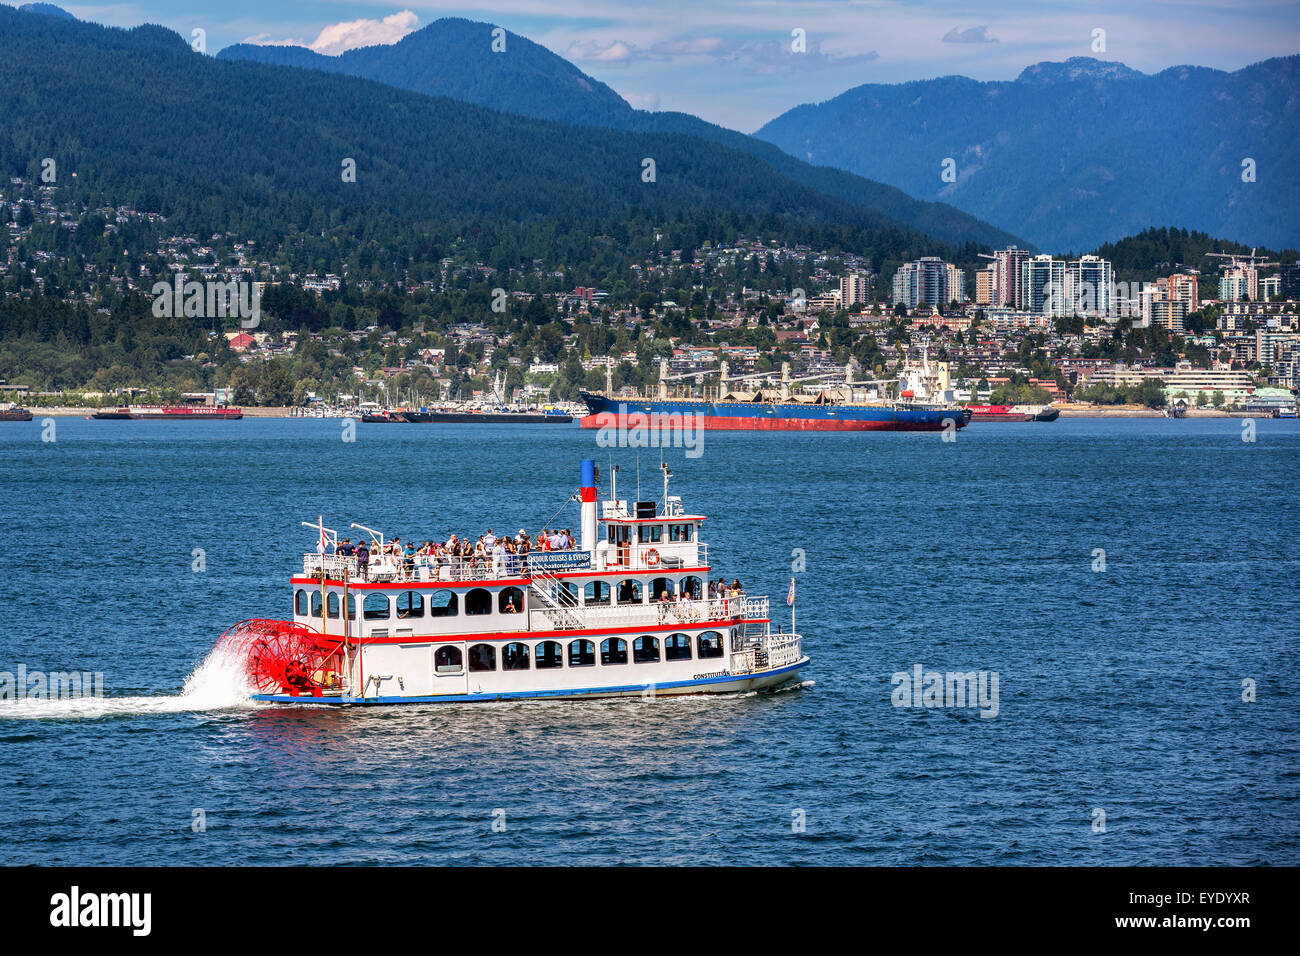 Old paddle steamer in Vancouver Harbour, Vancouver, British Columbia, Canada Stock Photo